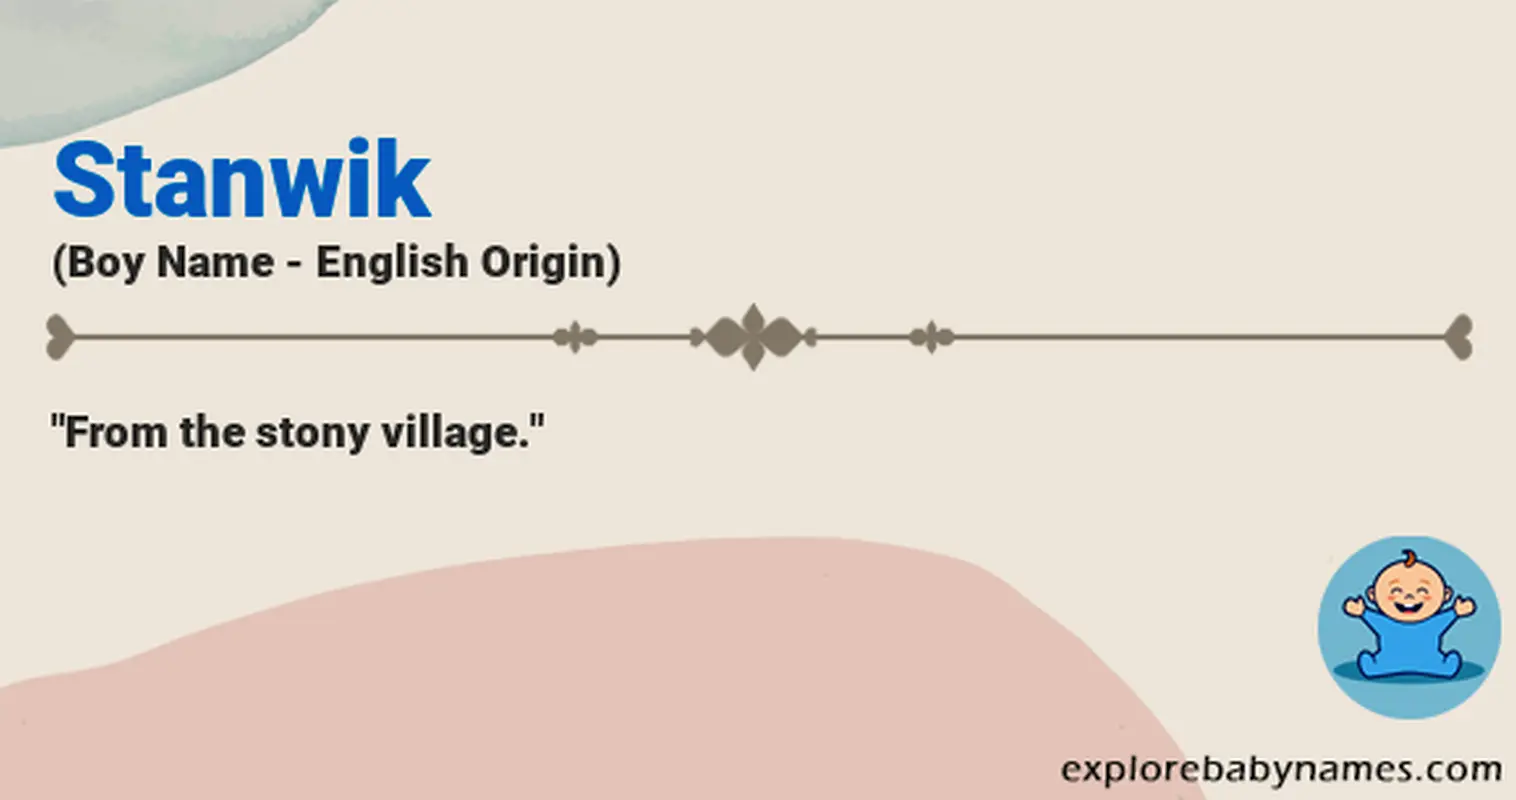 Meaning of Stanwik